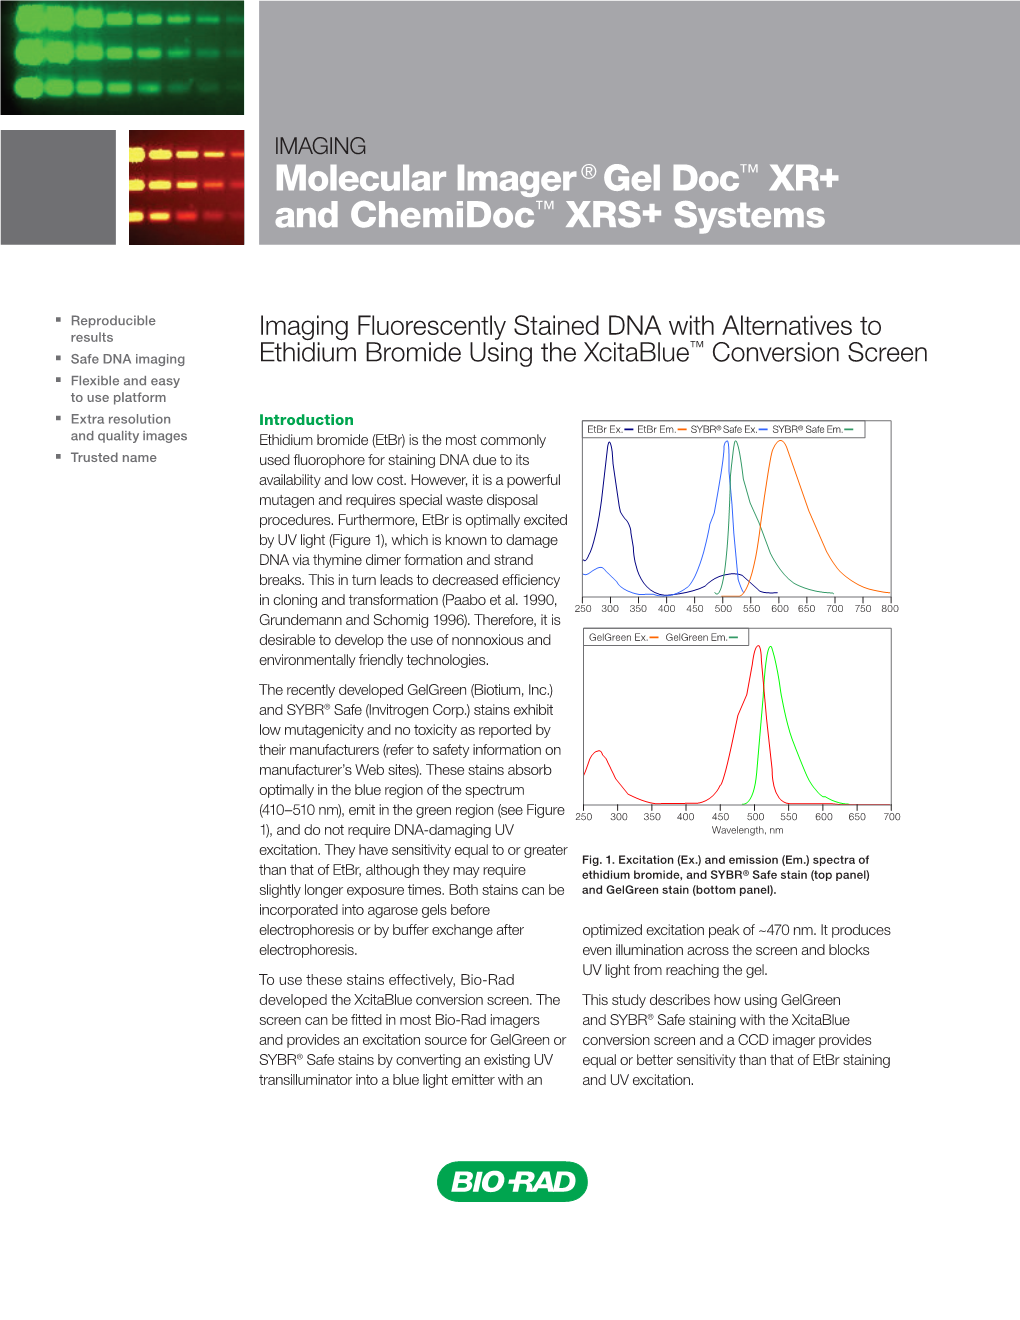 Molecular Imager ® Gel Doc™ XR+ and Chemidoc™ XRS+ Systems